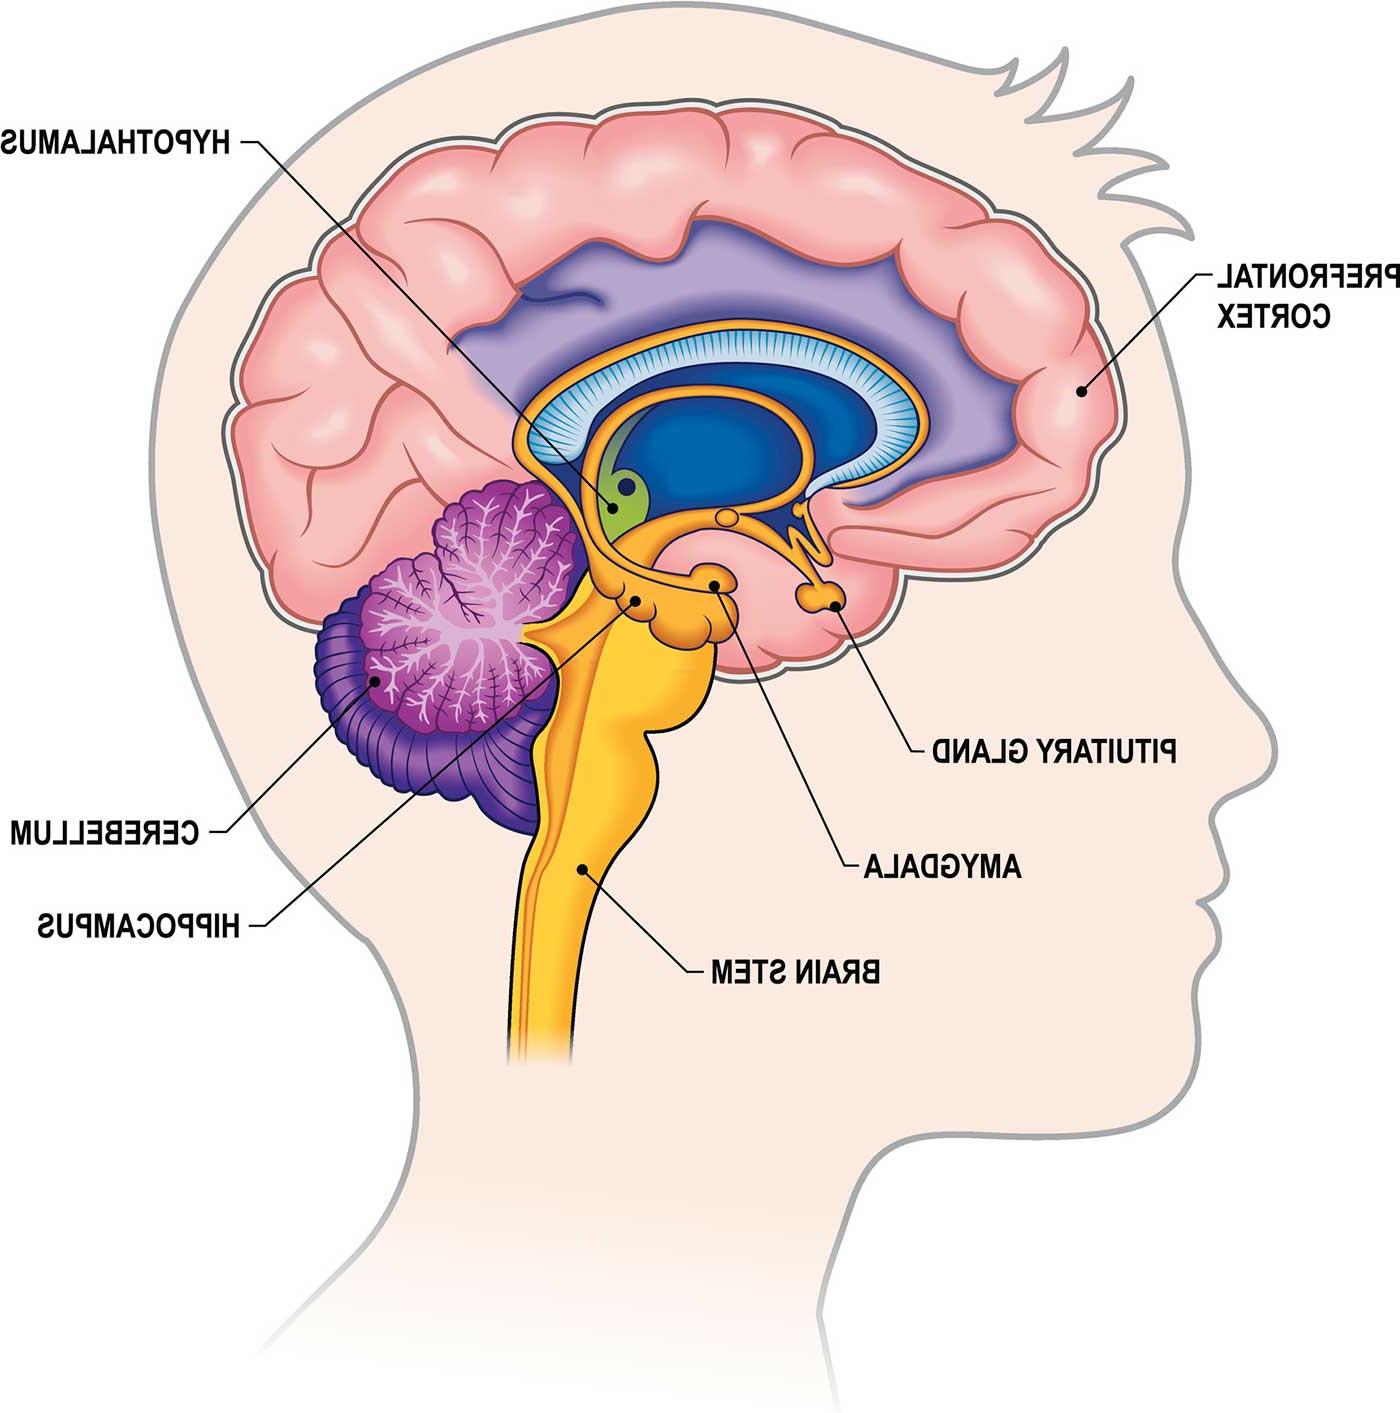 Diagram of the brain's deeper structures